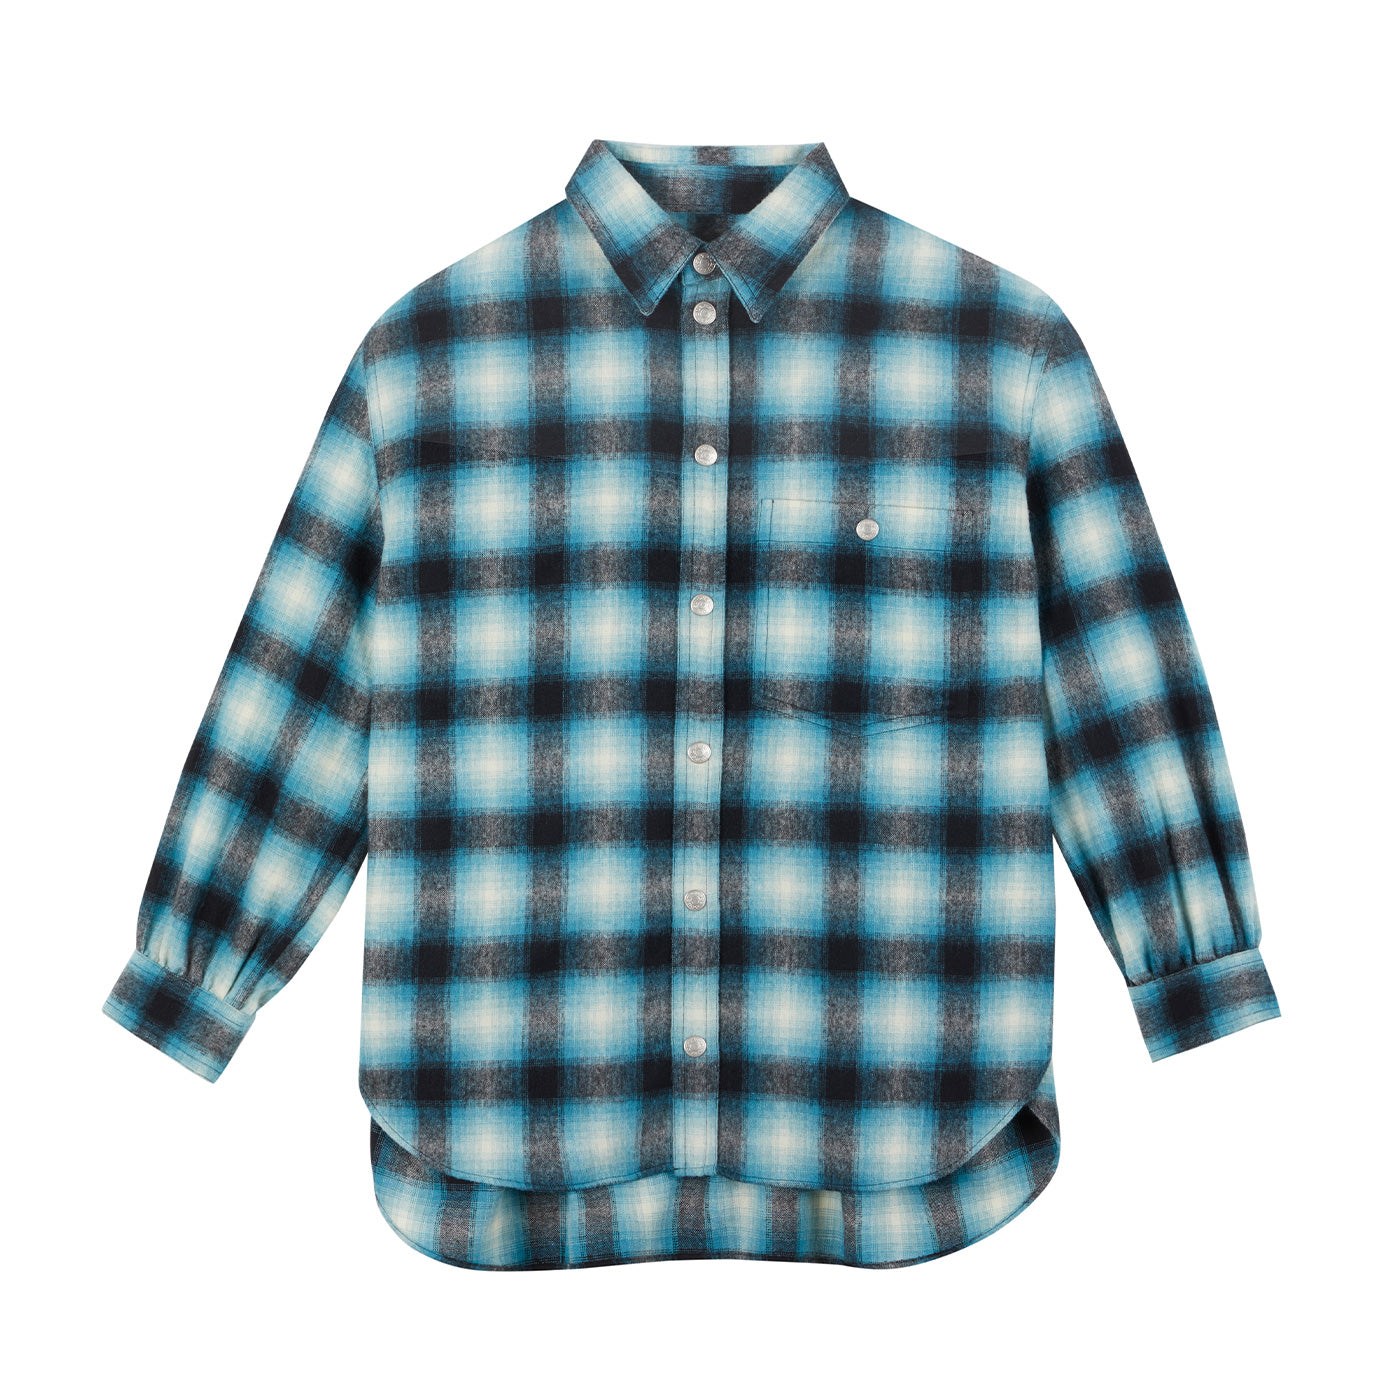 THE BLURRY CHECK OVERSHIRT IN TURQUOISE / BLACK